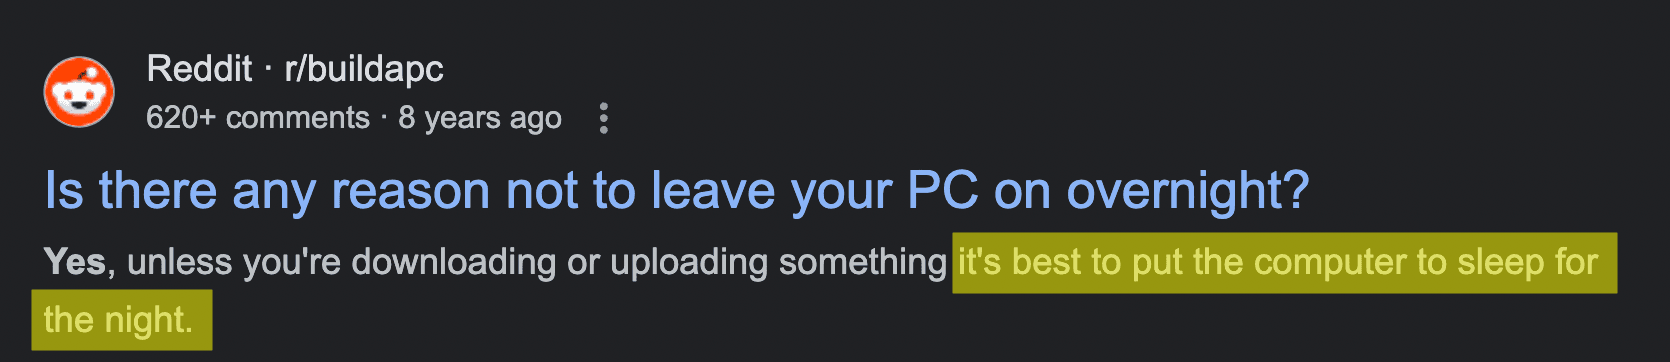 reddit quote is there any reason to leave your pc on overnight - image18.png